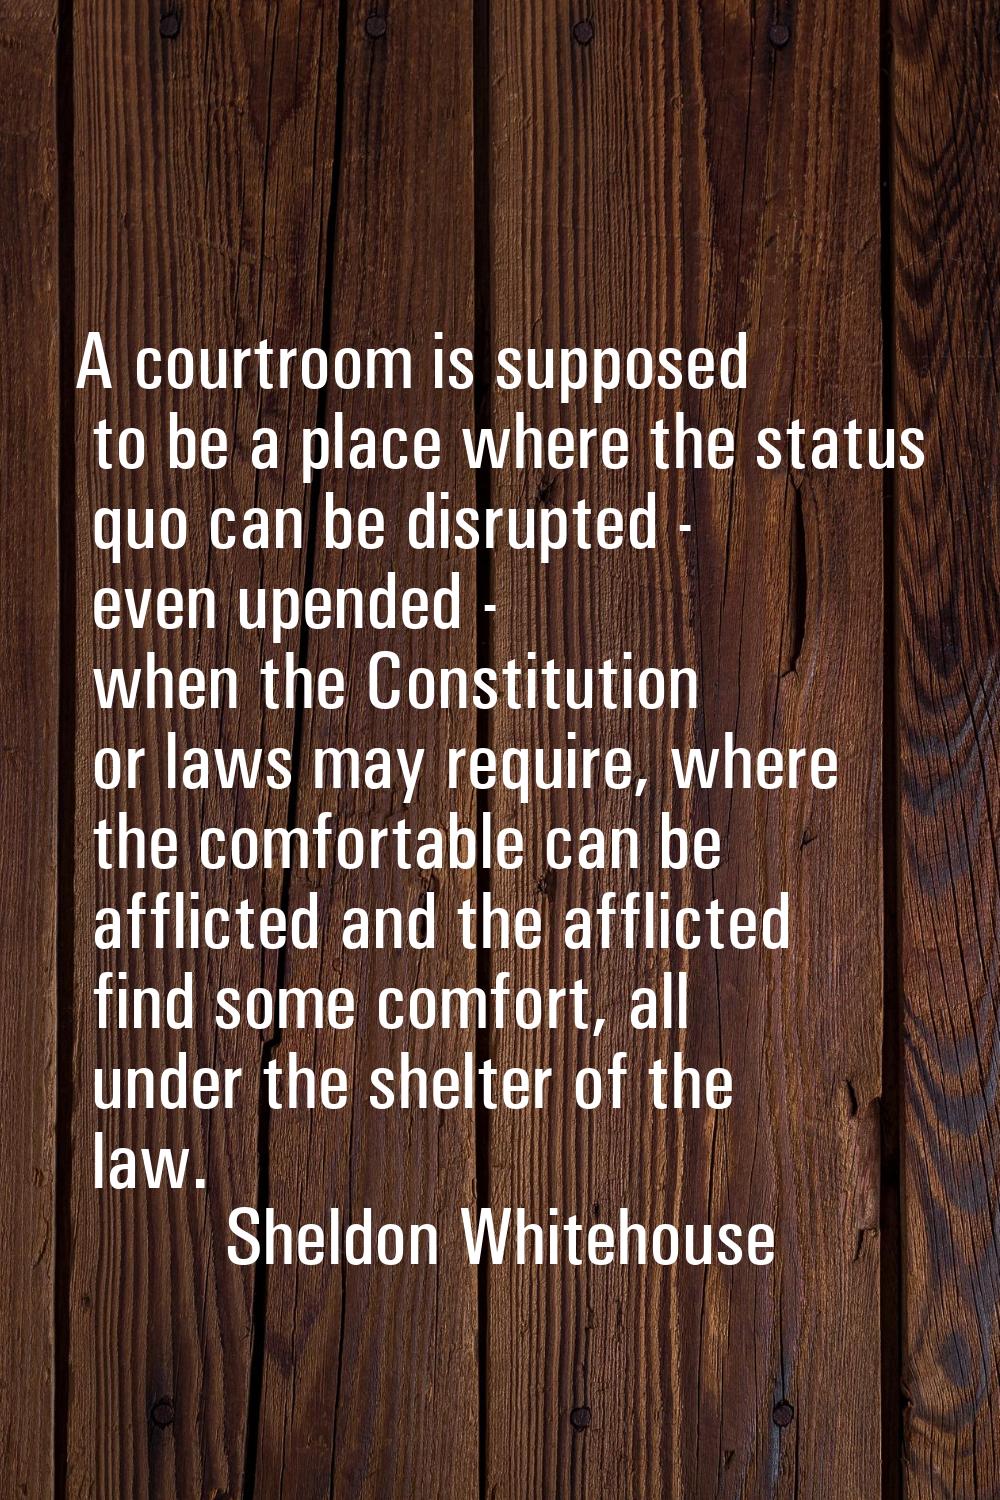 A courtroom is supposed to be a place where the status quo can be disrupted - even upended - when t